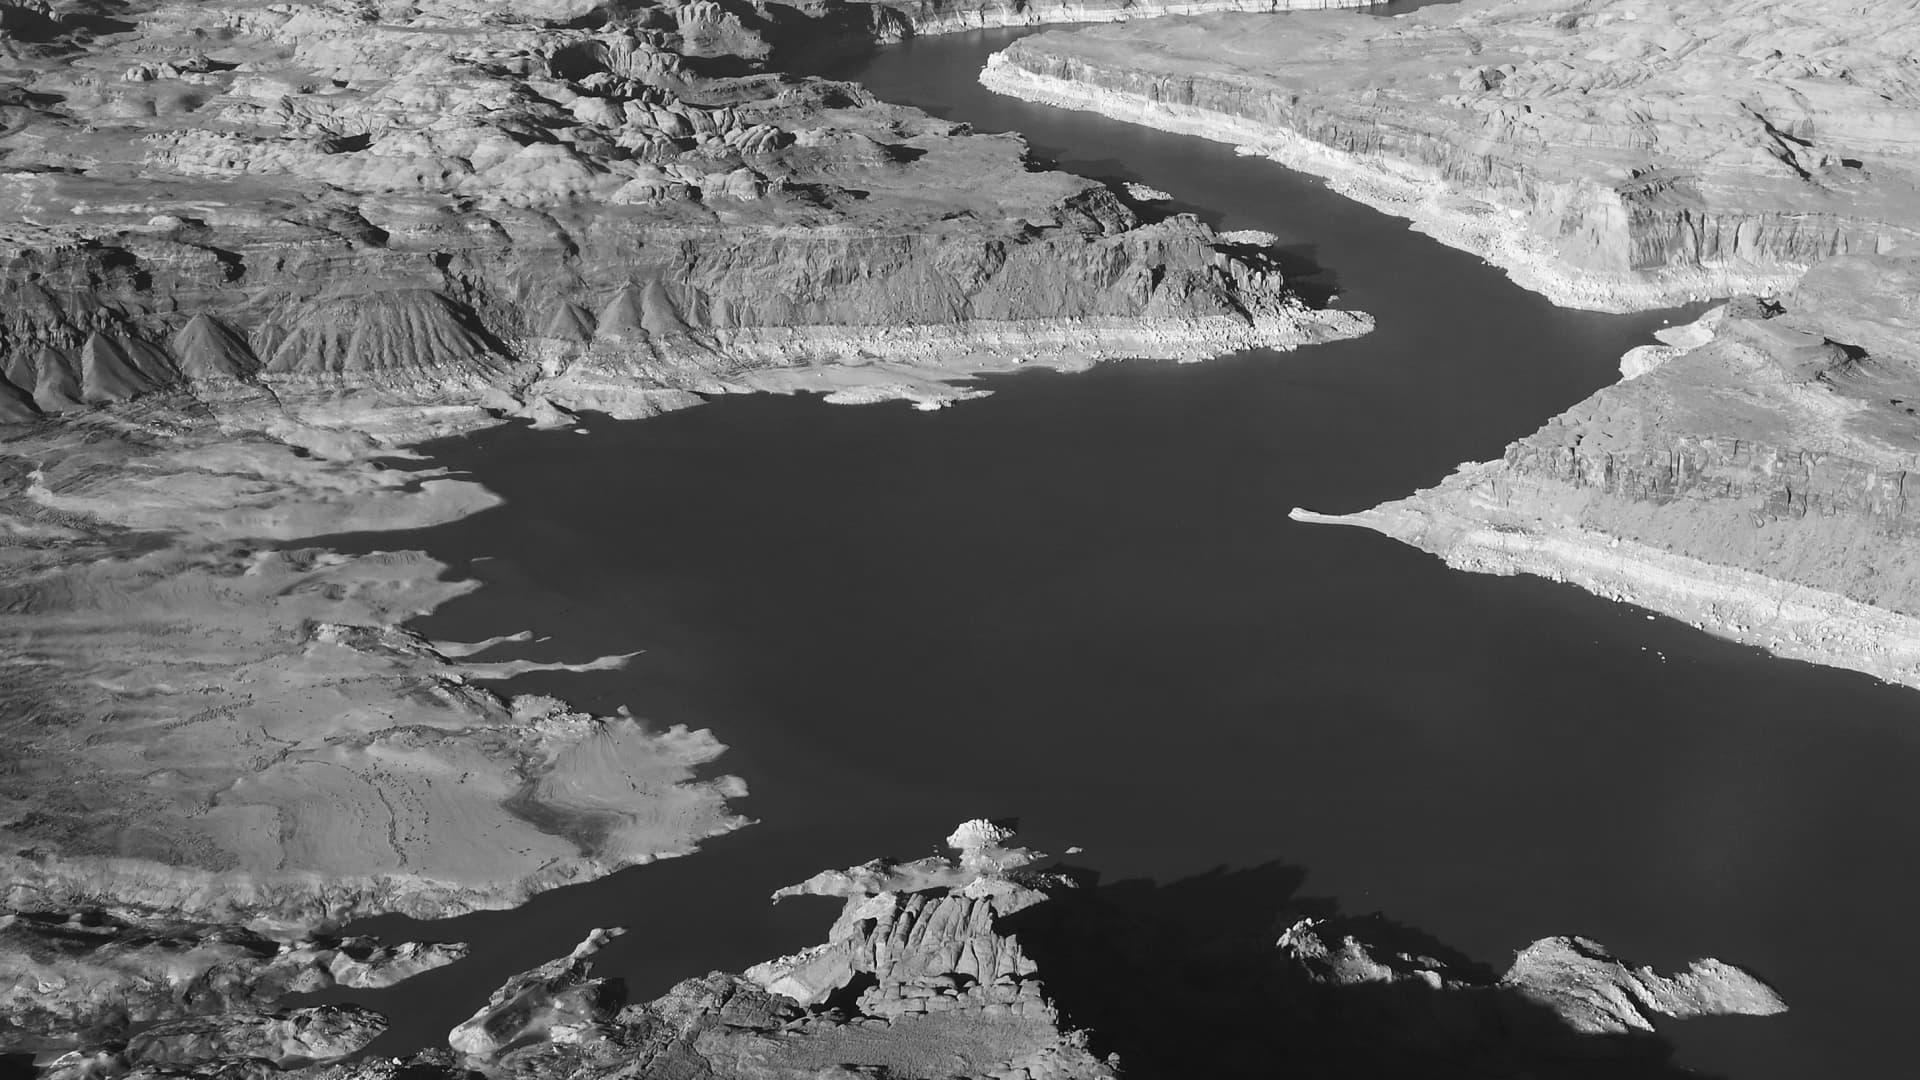 Lake Powell Glen Canyon Dam water {release|launch} delayed {due to|because of|as a result of|resulting from|on account of|as a consequence of|attributable to} drought